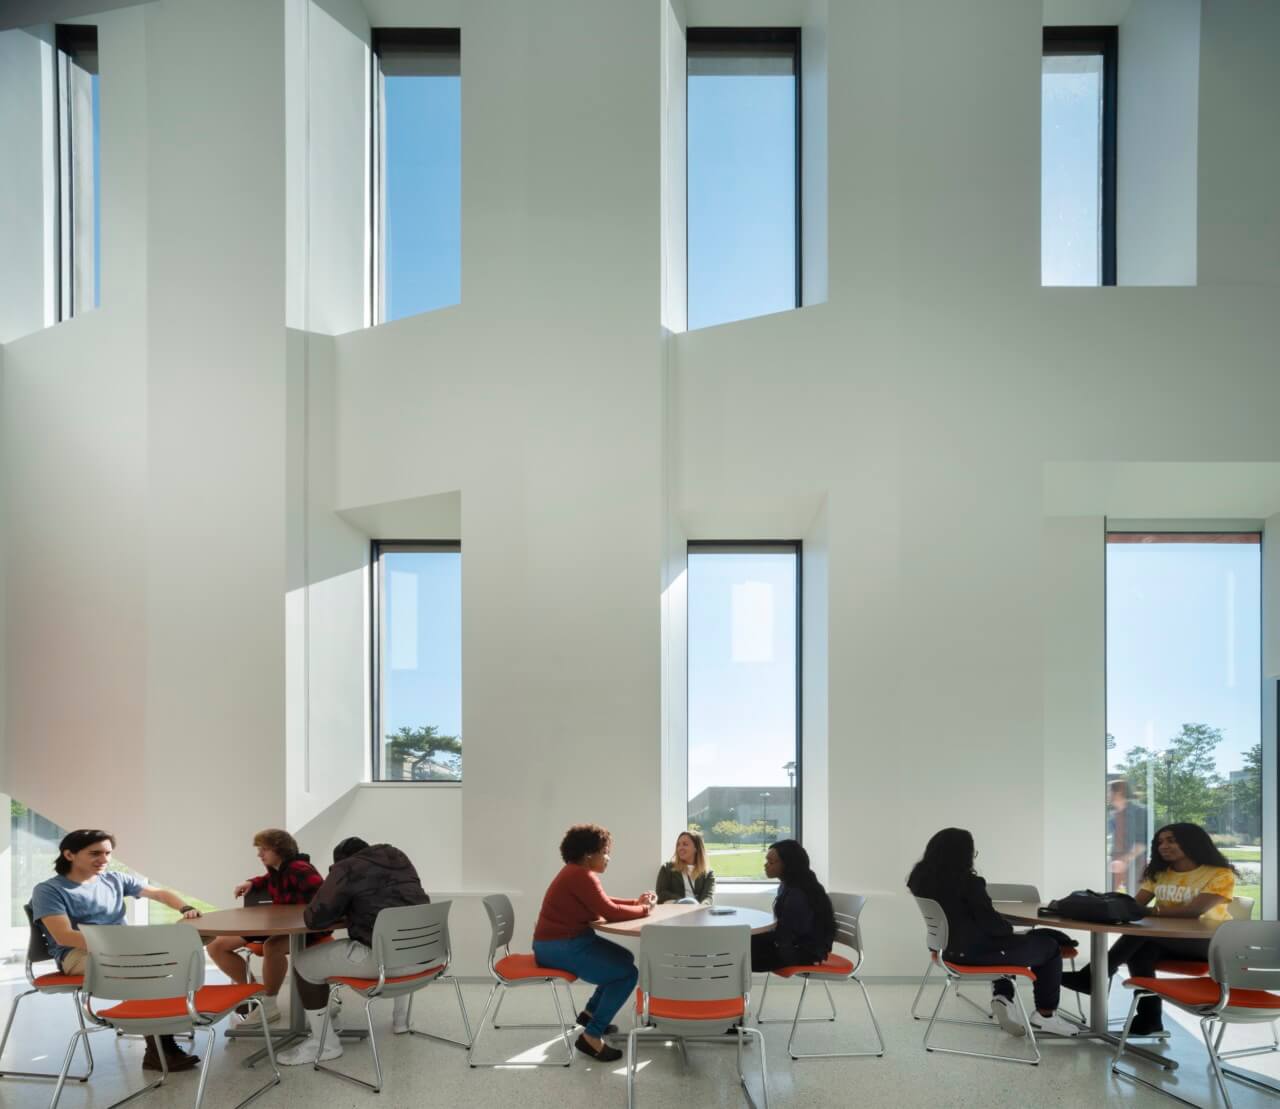 Students by large white windows